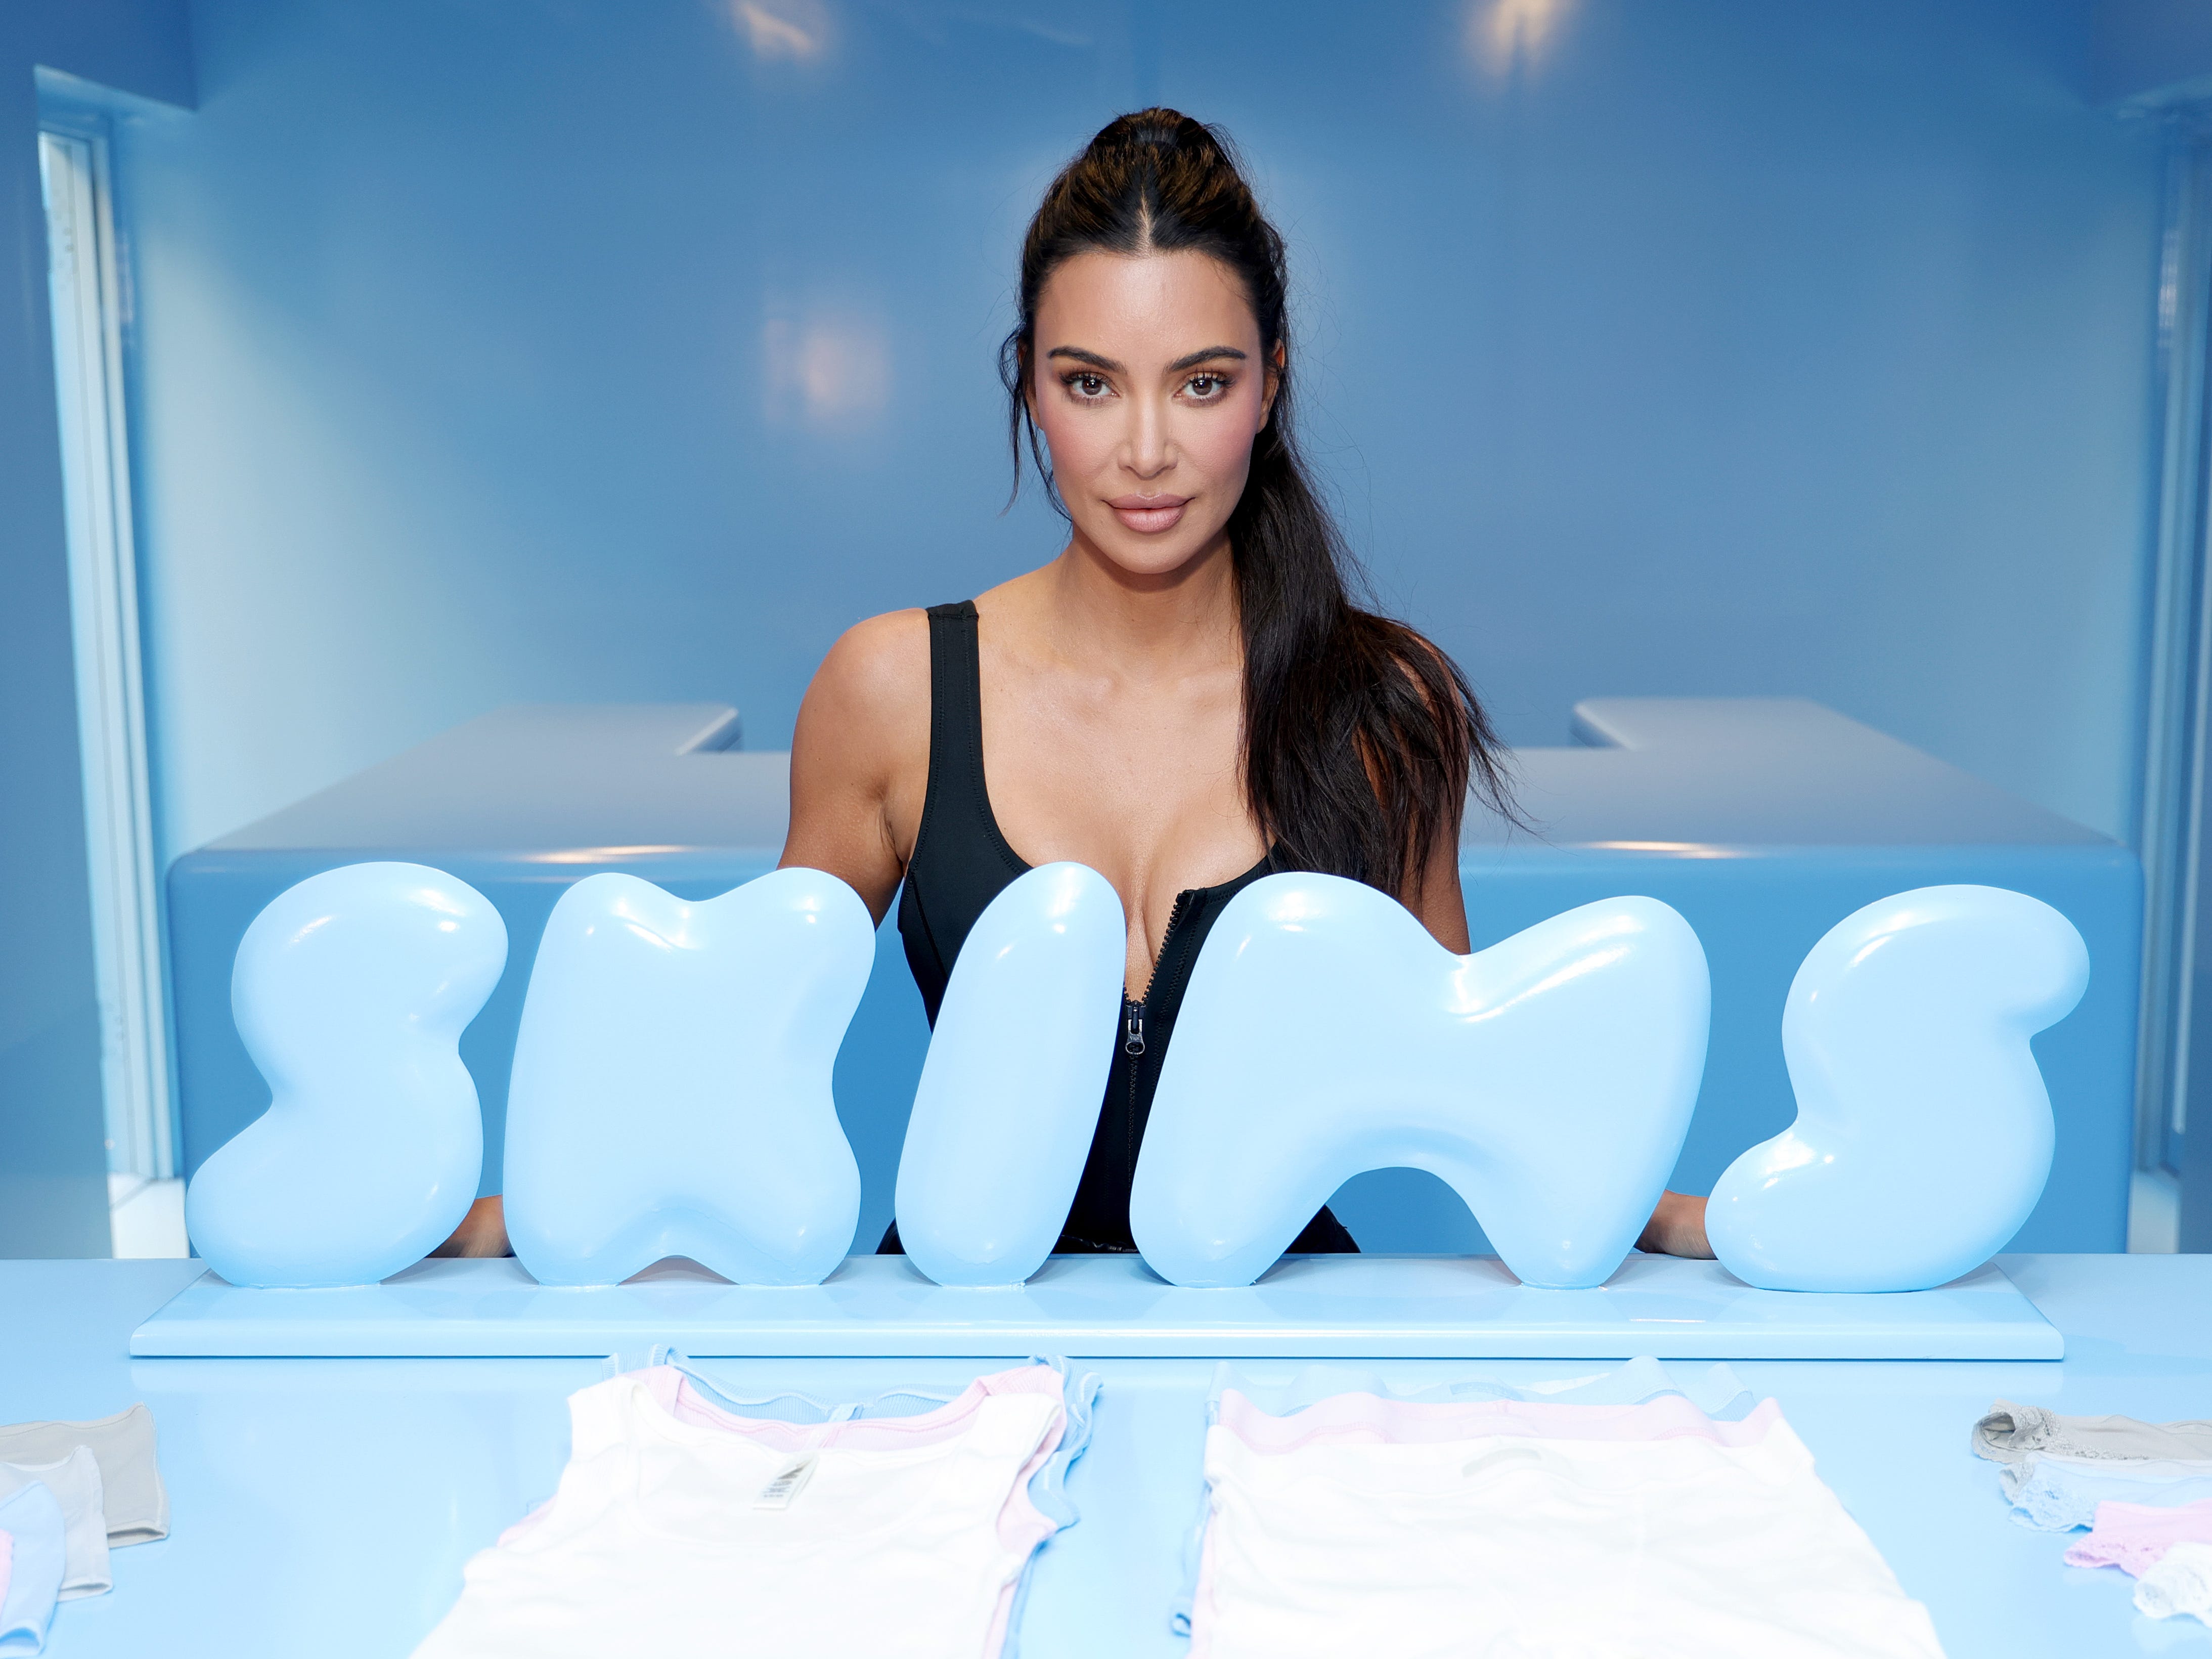 She Surpassed Spanx, Victoria's Secret, And Even Those Who Hate Her Are  Buying Her Product. SKIMS Turned Kim Kardashian Into A Billionaire.